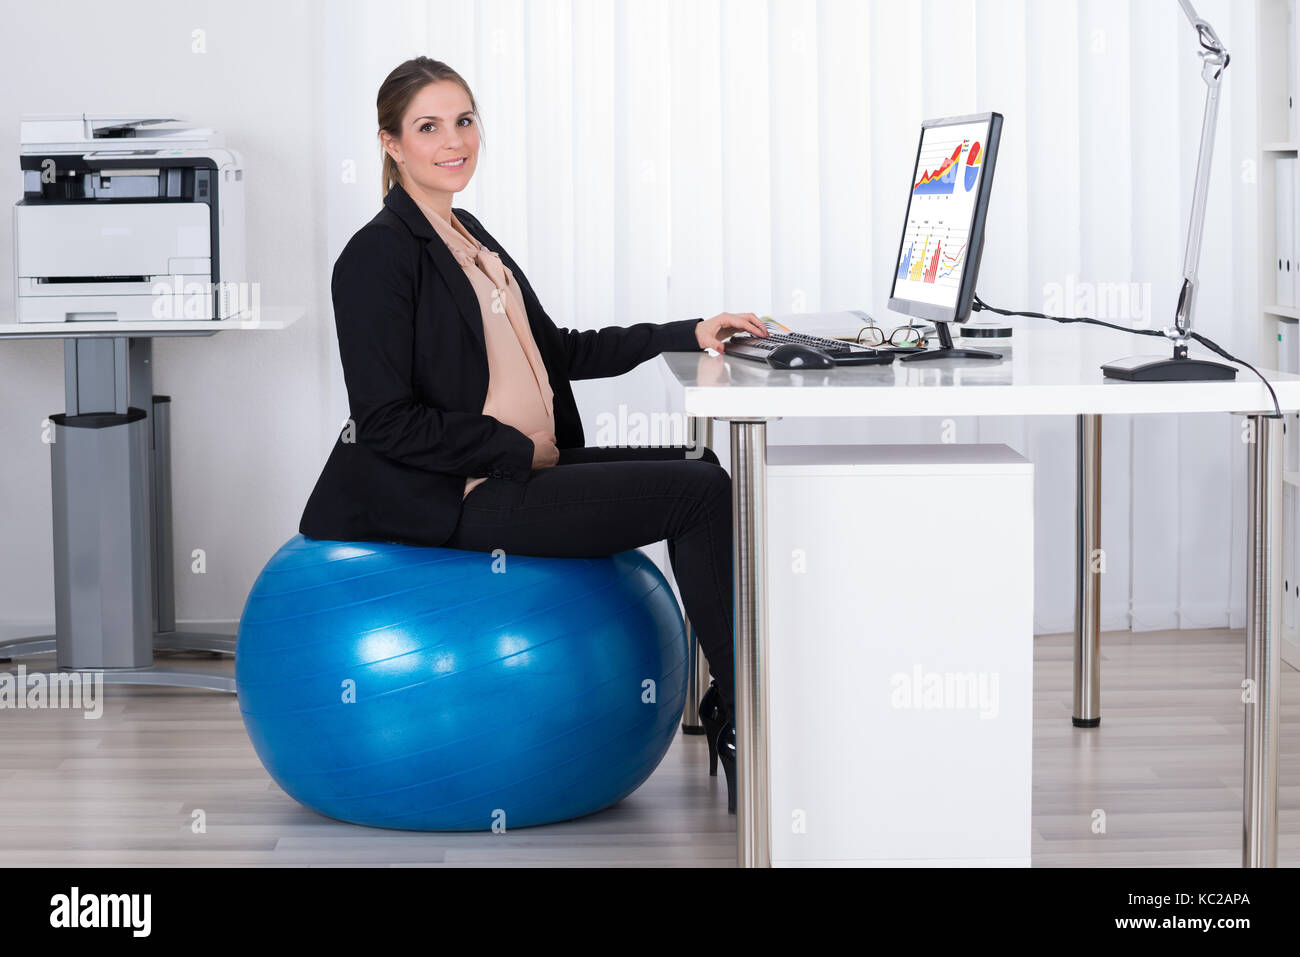 Pregnant Businesswoman Sitting On Fitness Ball While Working On